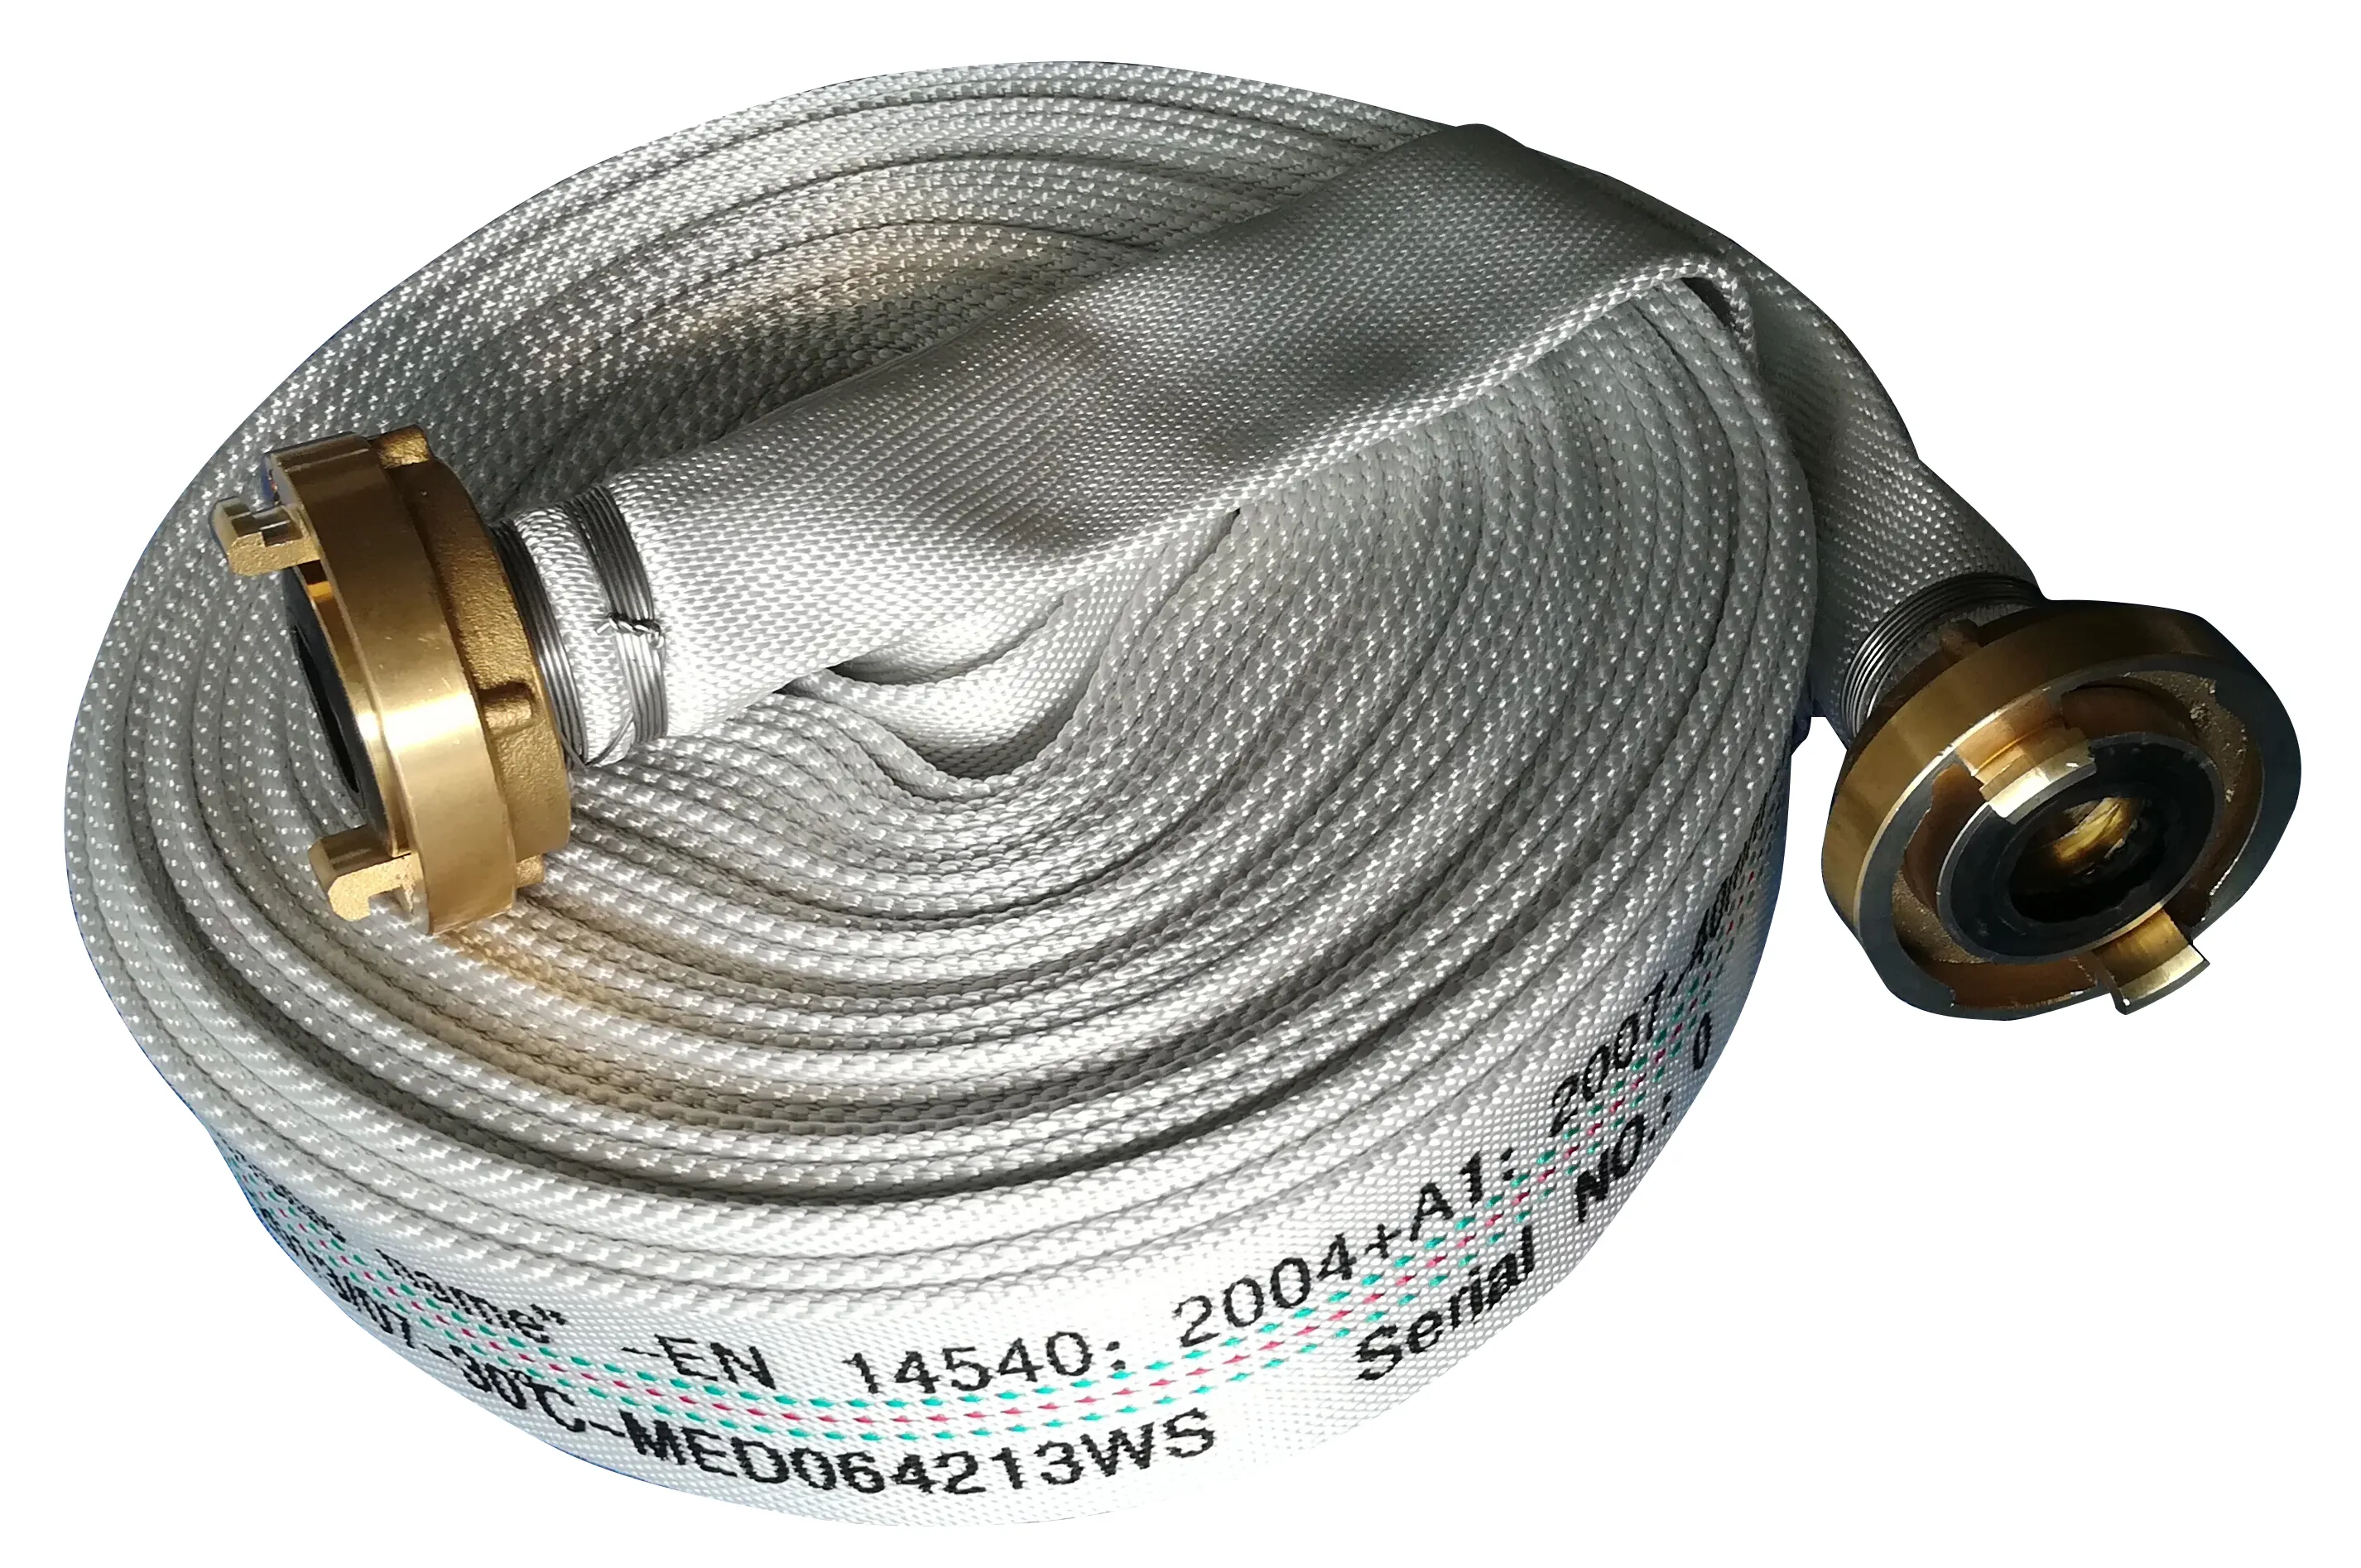 2 Inch PVC Fire Hose 30 Meters Long for Fire Fighting Equipment Accessories